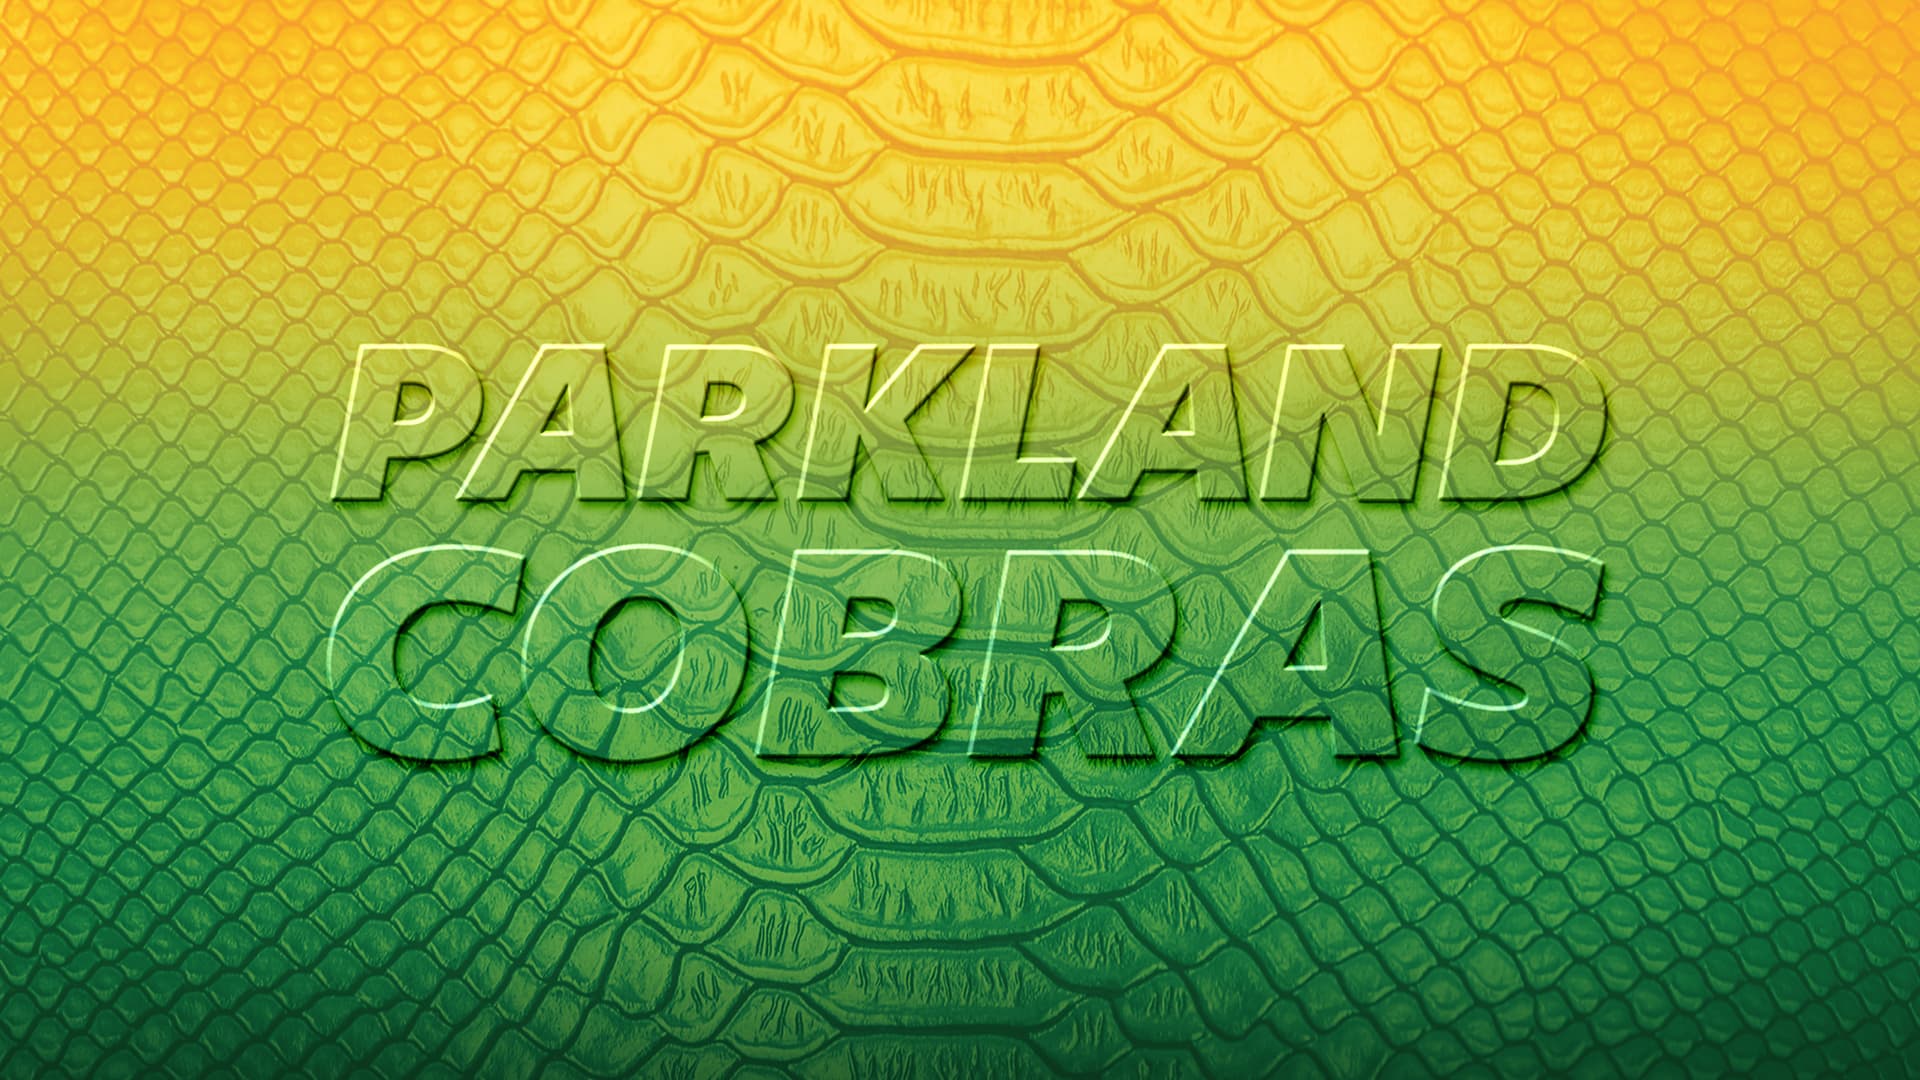 text parkland cobras on yellow and green snakeskin